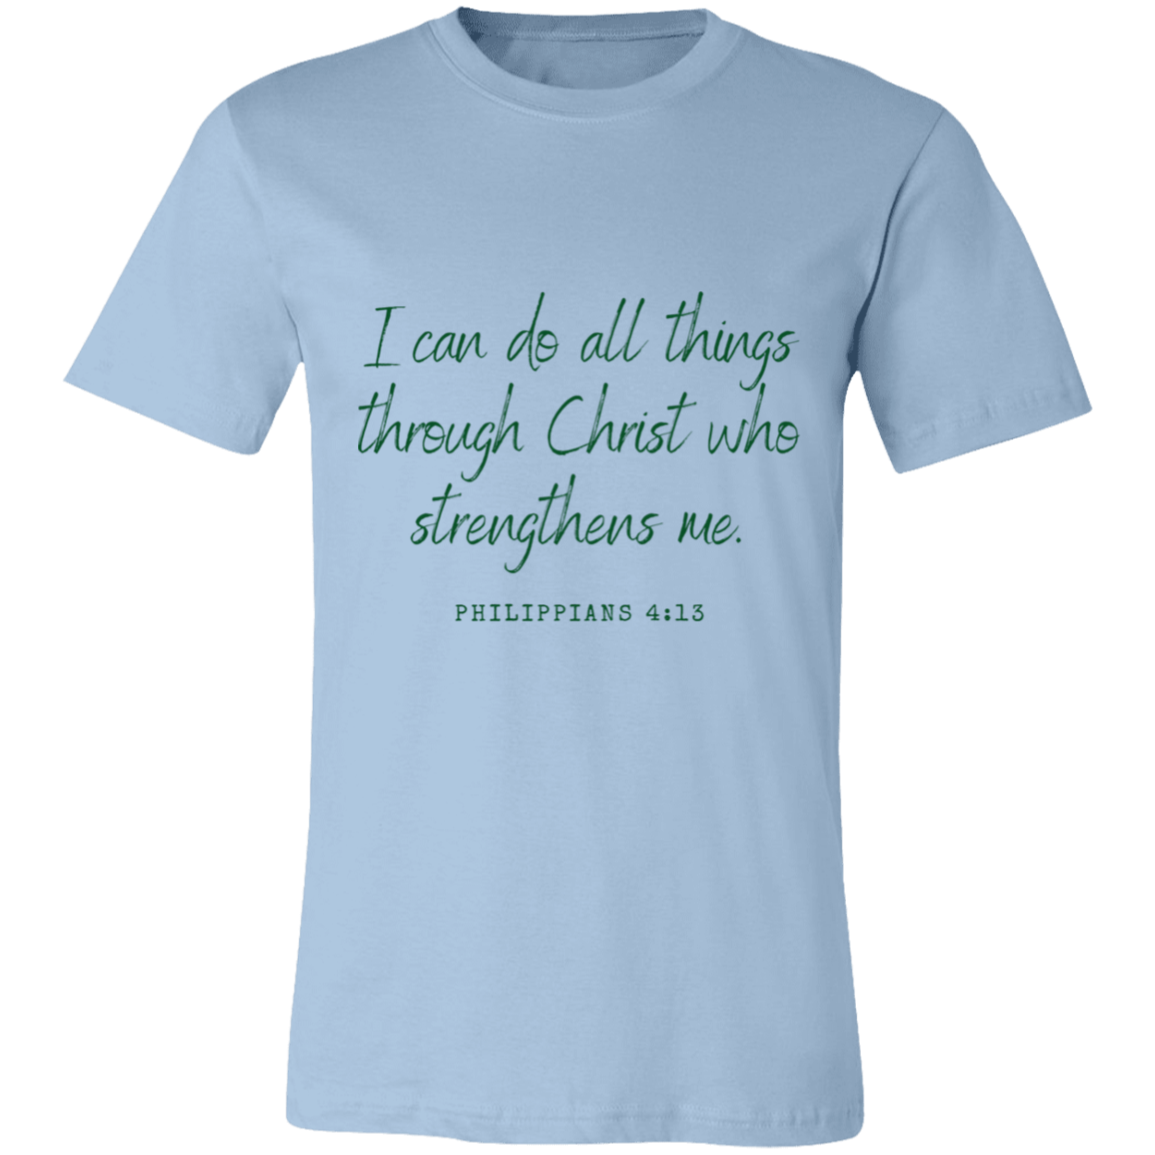 I Can Do All Things - Jersey Short-Sleeve T-Shirt